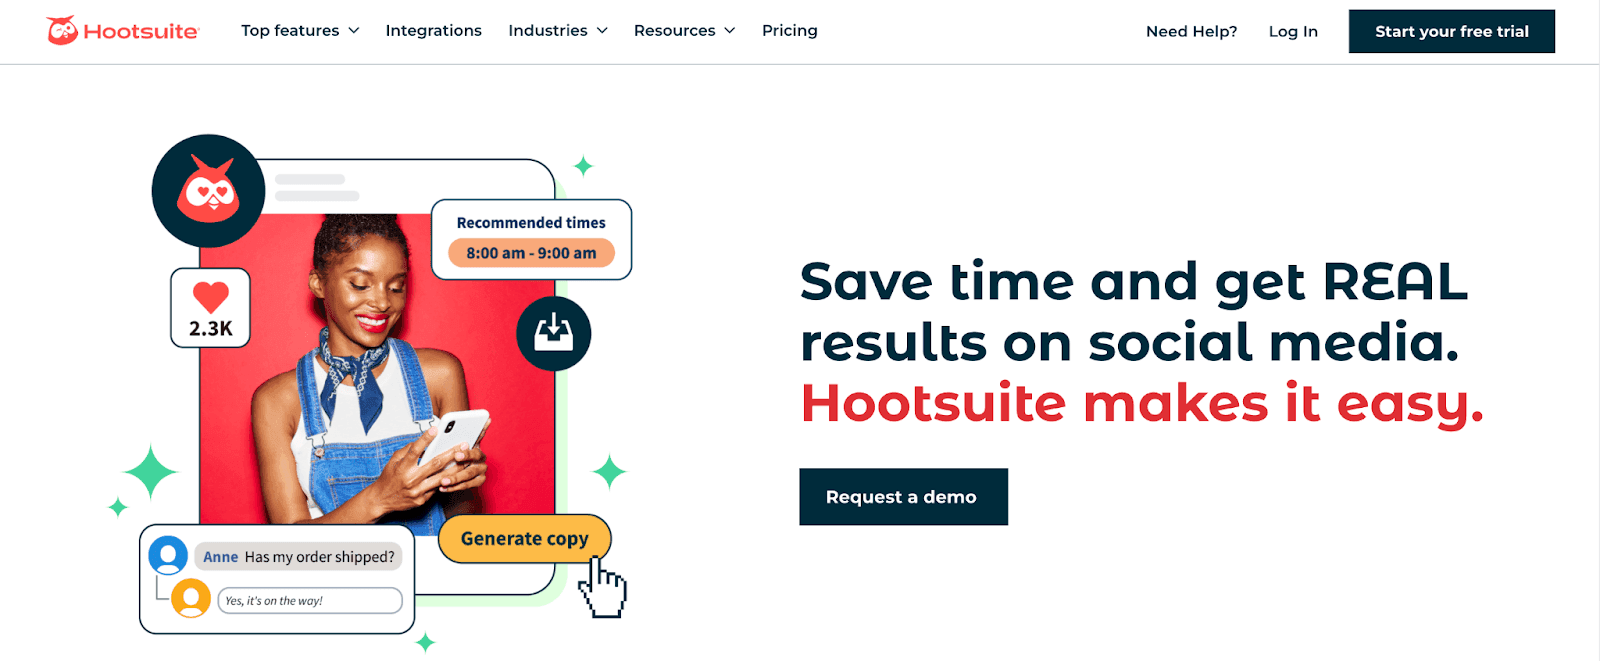 Save time and get REAL results on social media. Hootsuite makes it easy.